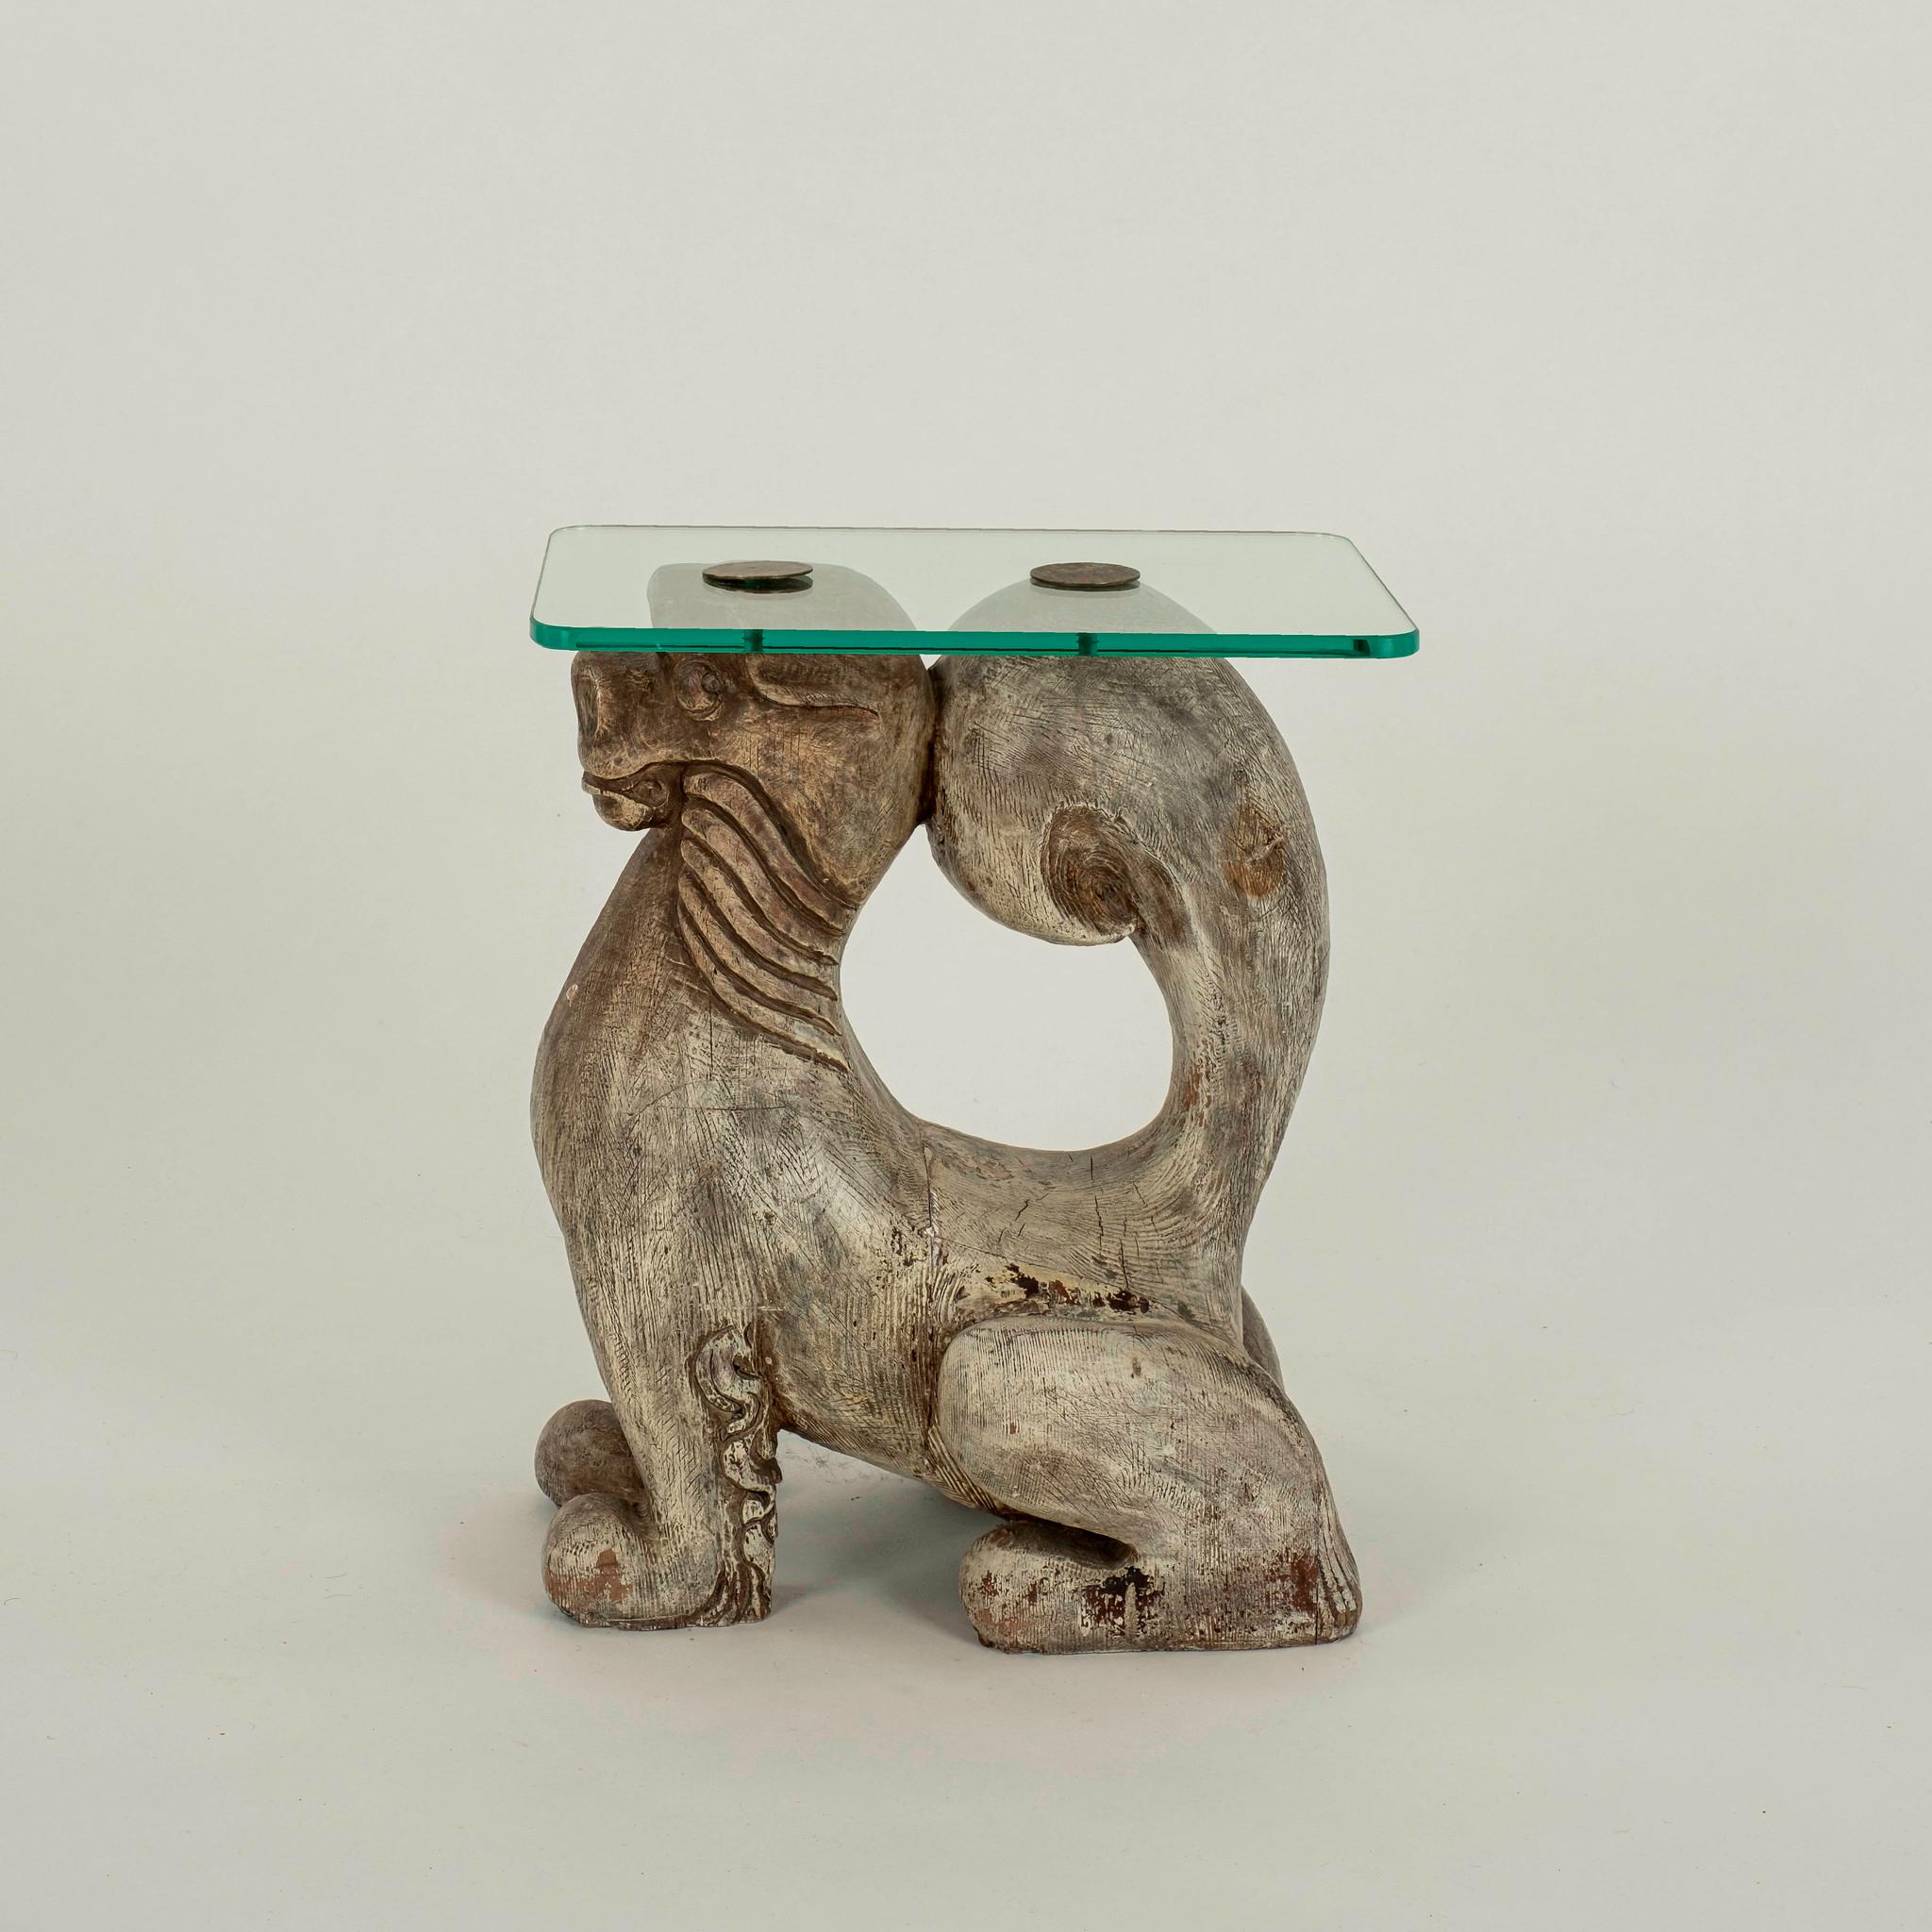 Whimsical 20th century hand carved foo dog table with glass top.